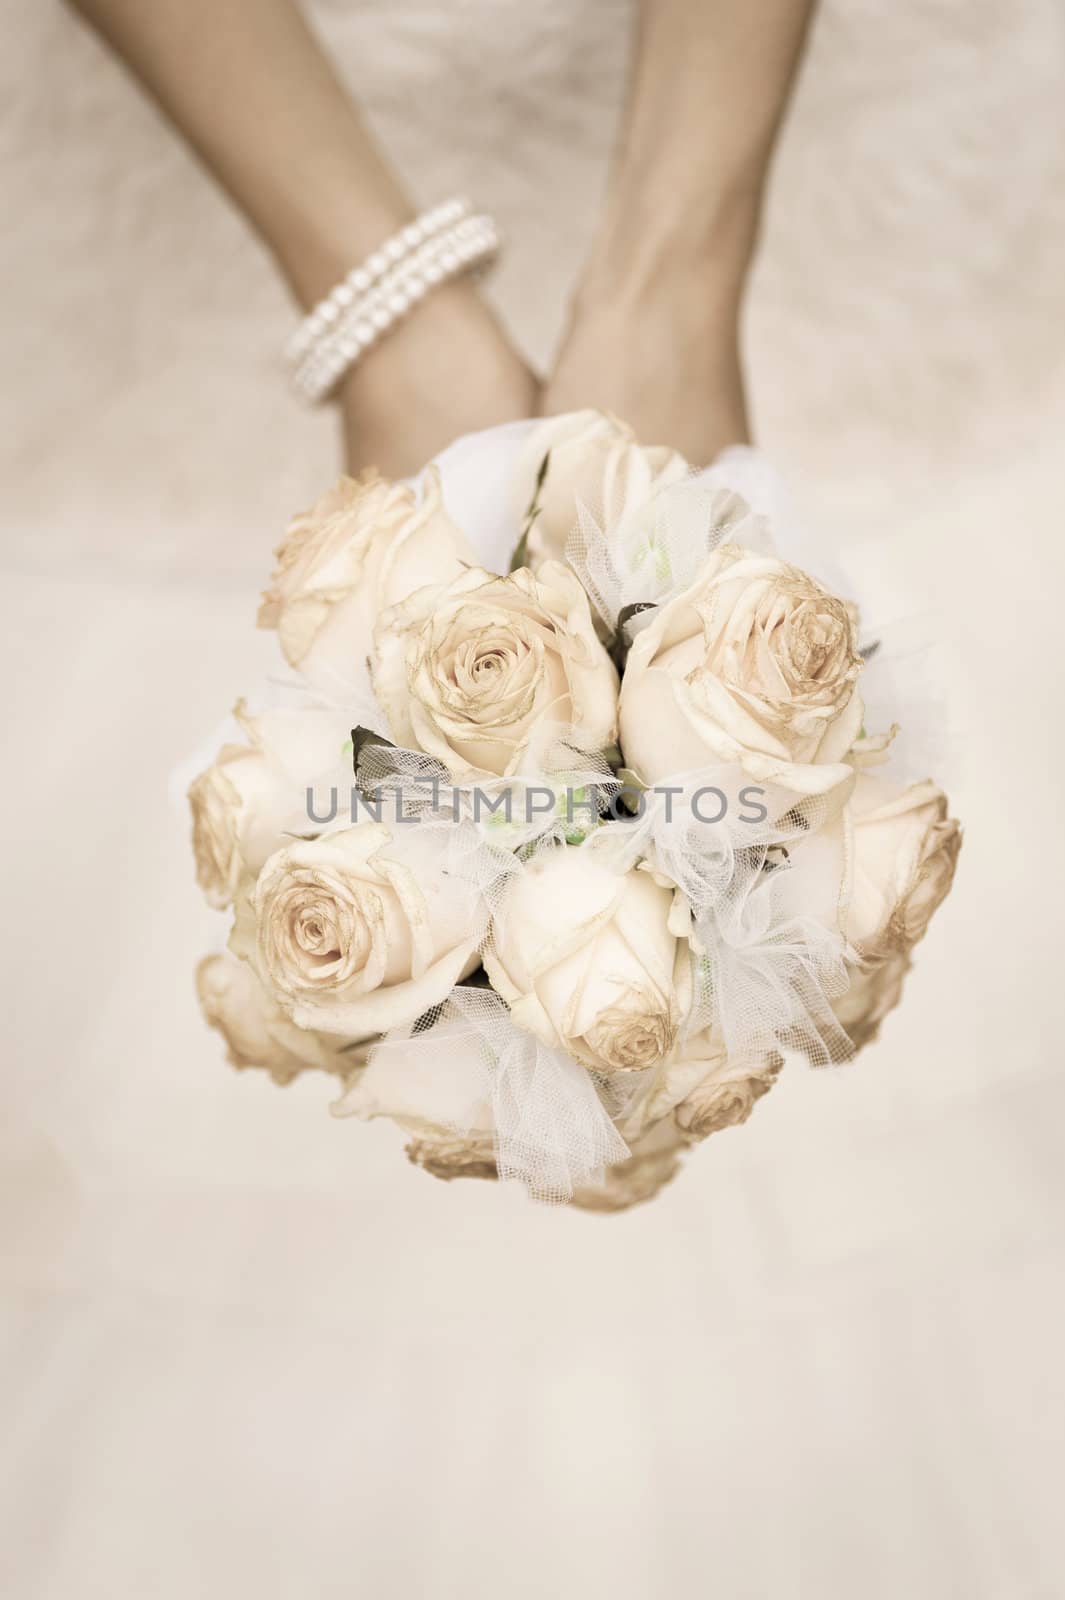 beauty wedding bouquet of roses in a bride hands. retro style